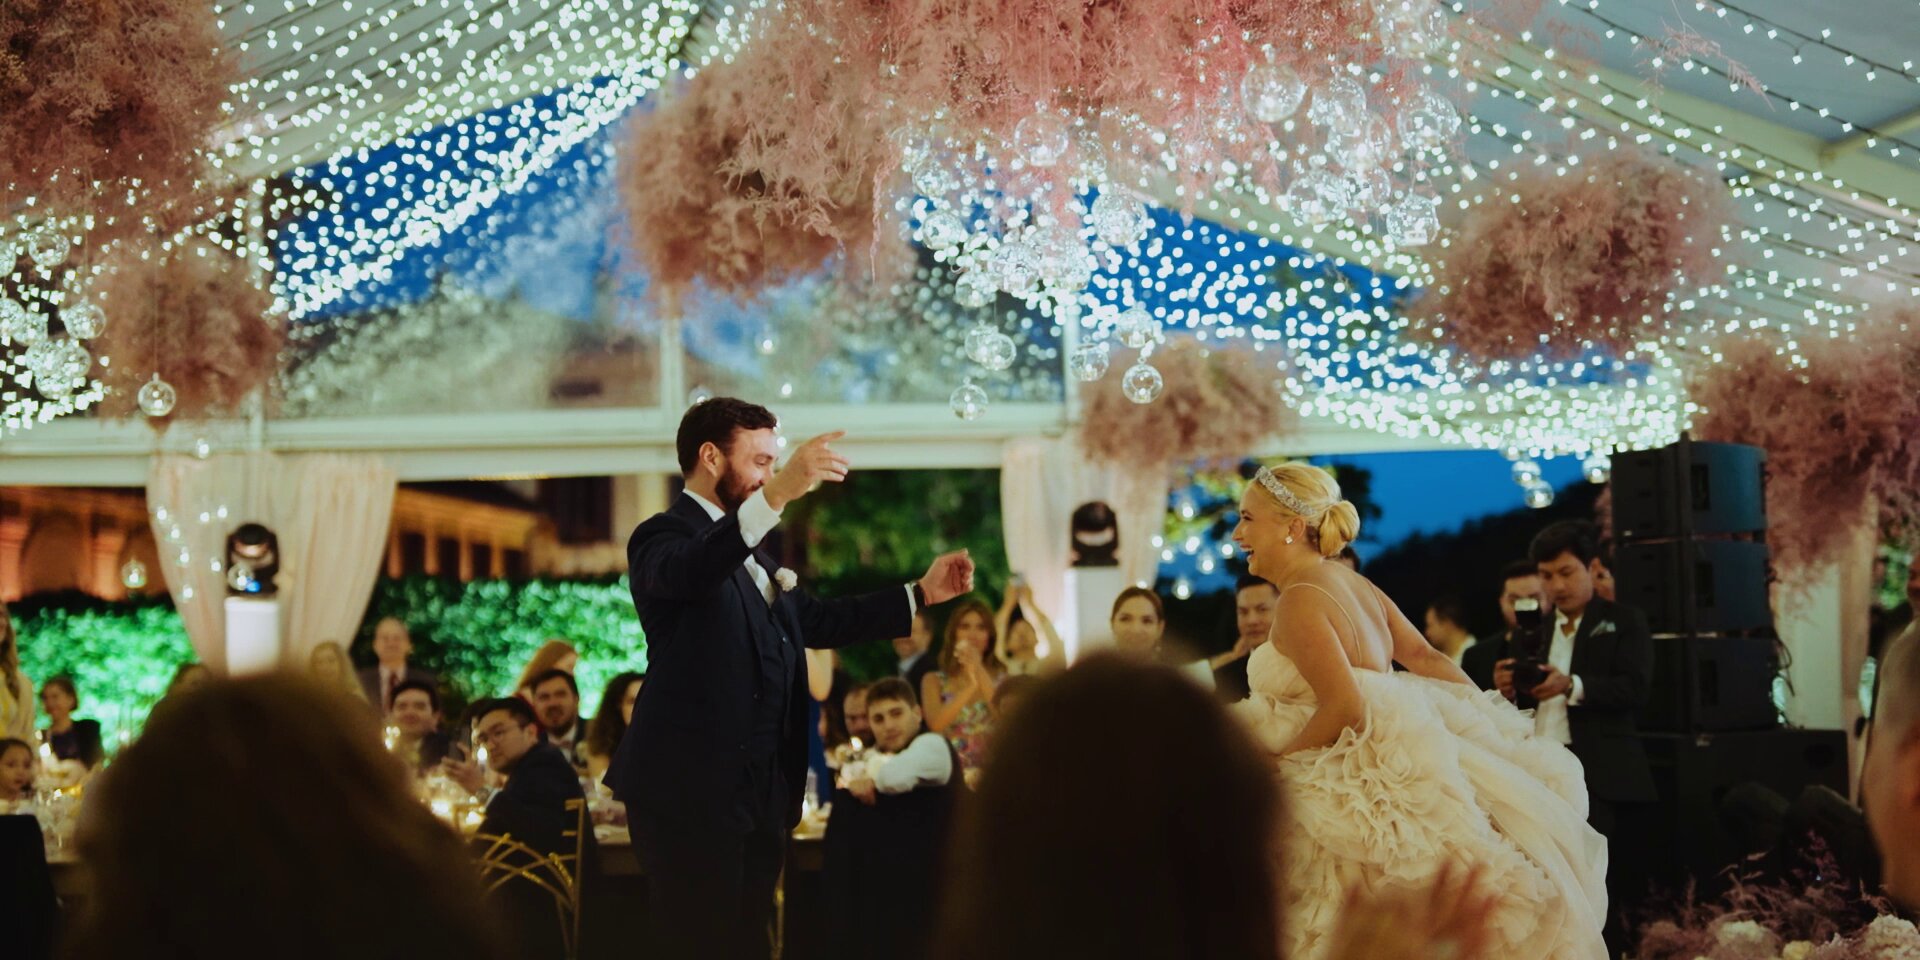 A still of Camila Lhuillier (R) and Andrea Albani (L) from Magbanua's film of their wedding in Italy